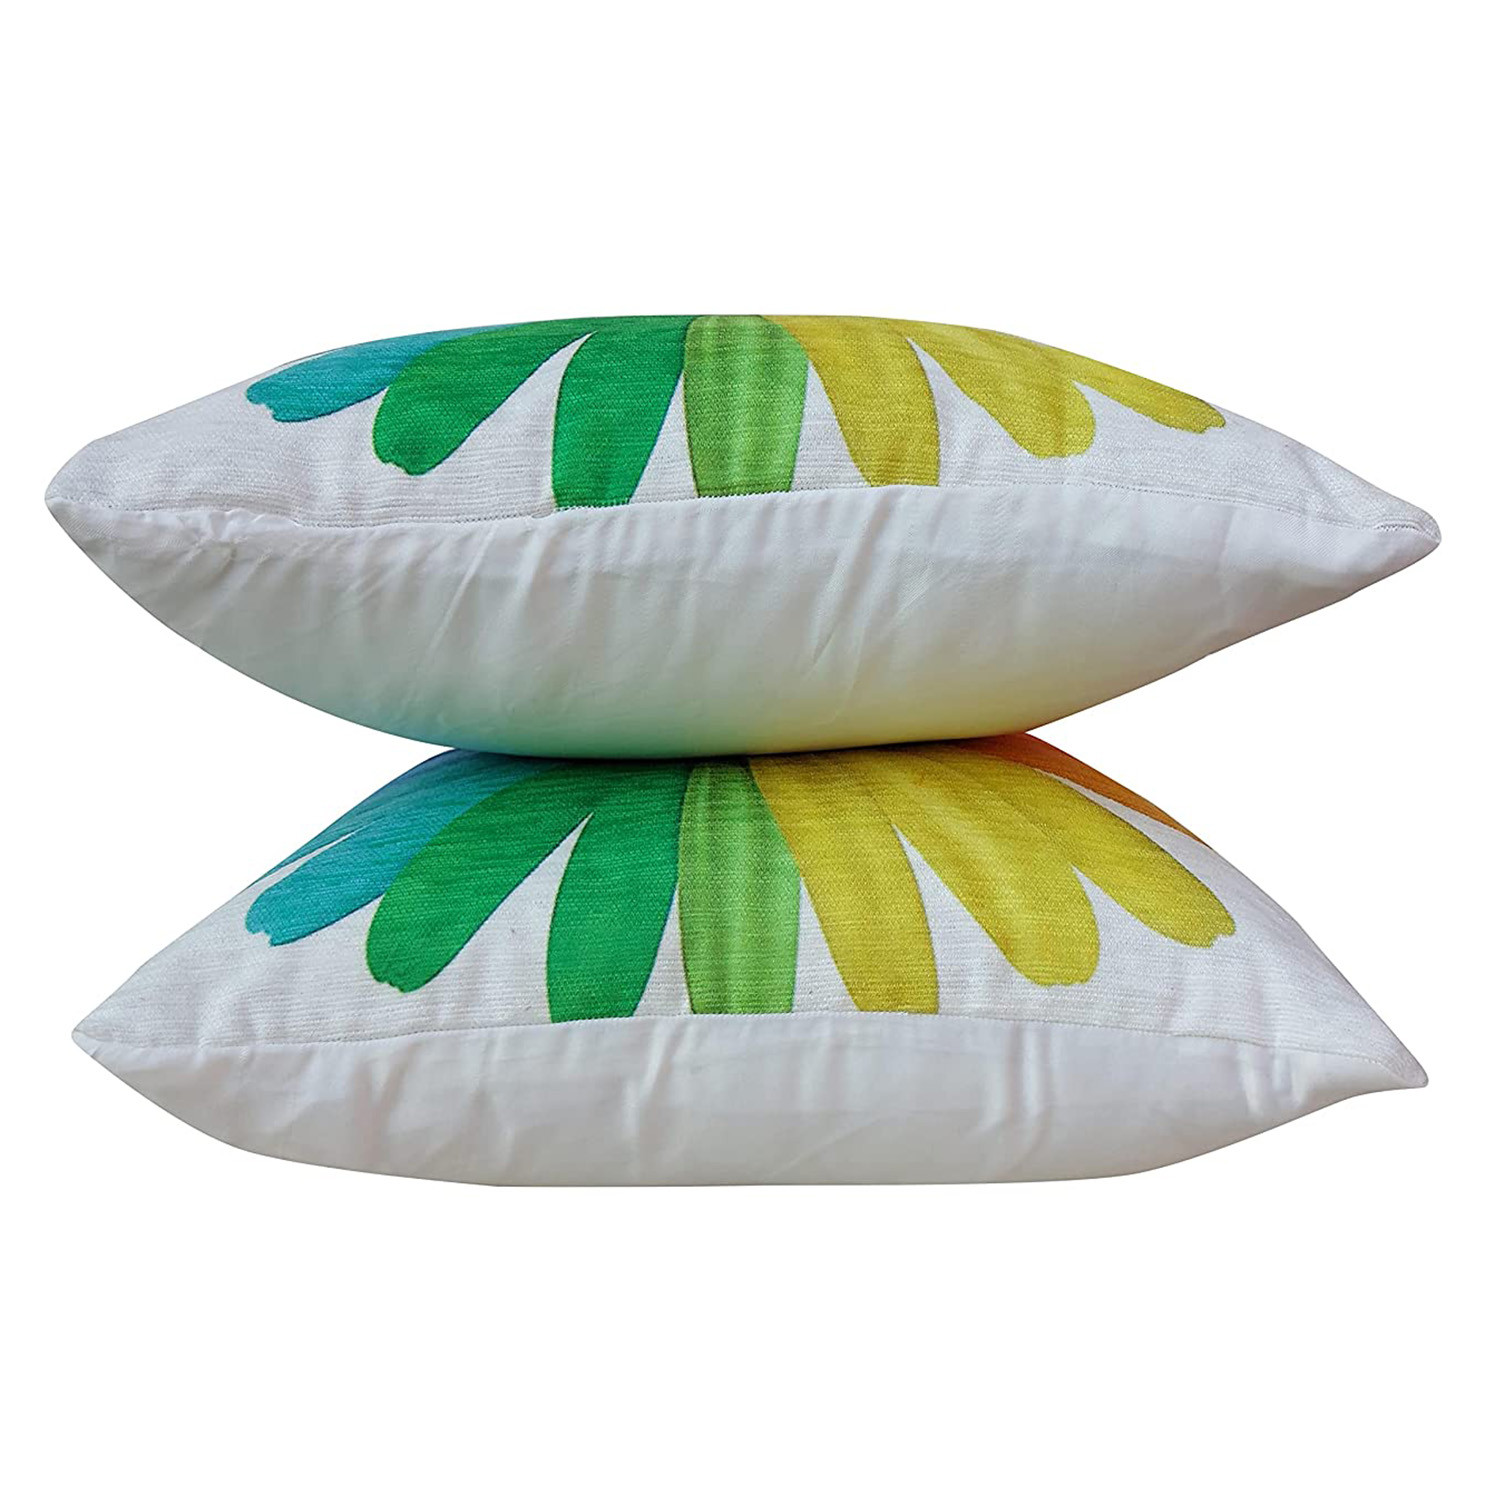 Kuber Industries Cushion Cover|Ractangle Cushion Covers|Sofa Cushion Covers|Cushion Covers 16 inch x 16 inch|Cushion Cover Set of 5|WHITE